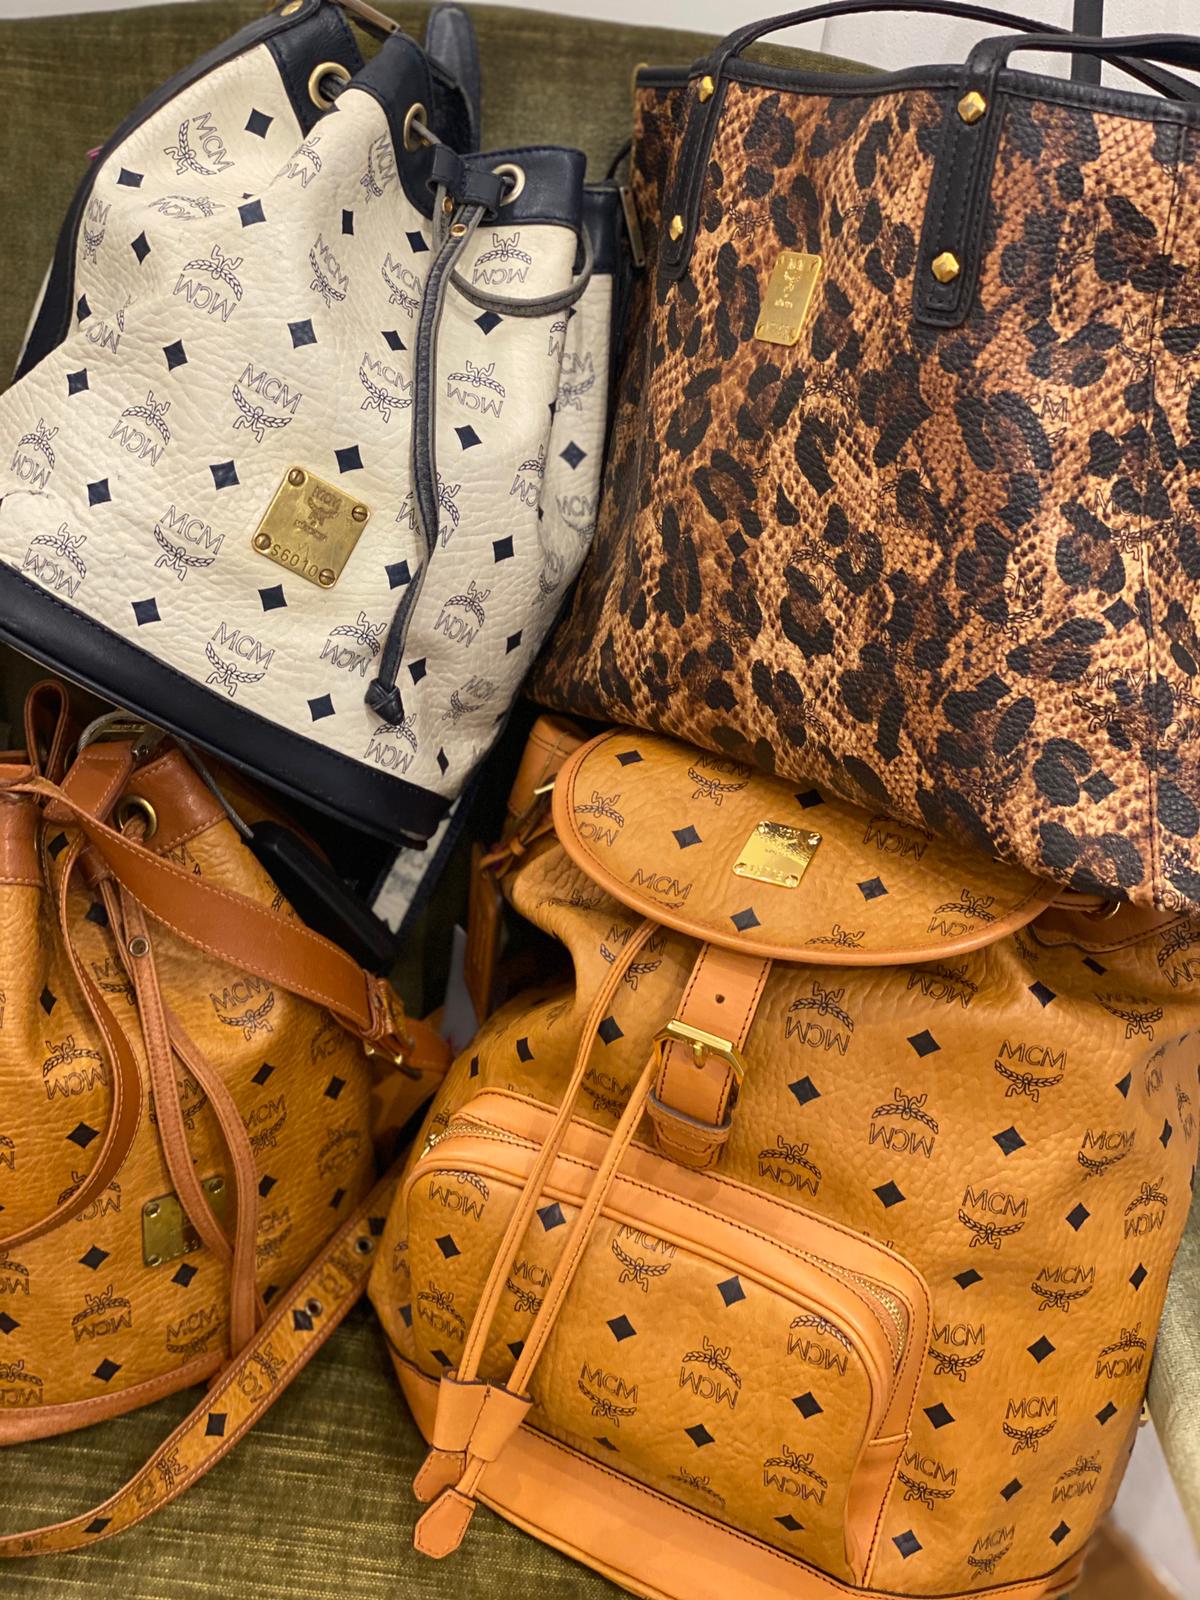 Unraveling the MCM Enigma: What Does the MCM Brand Stand For?